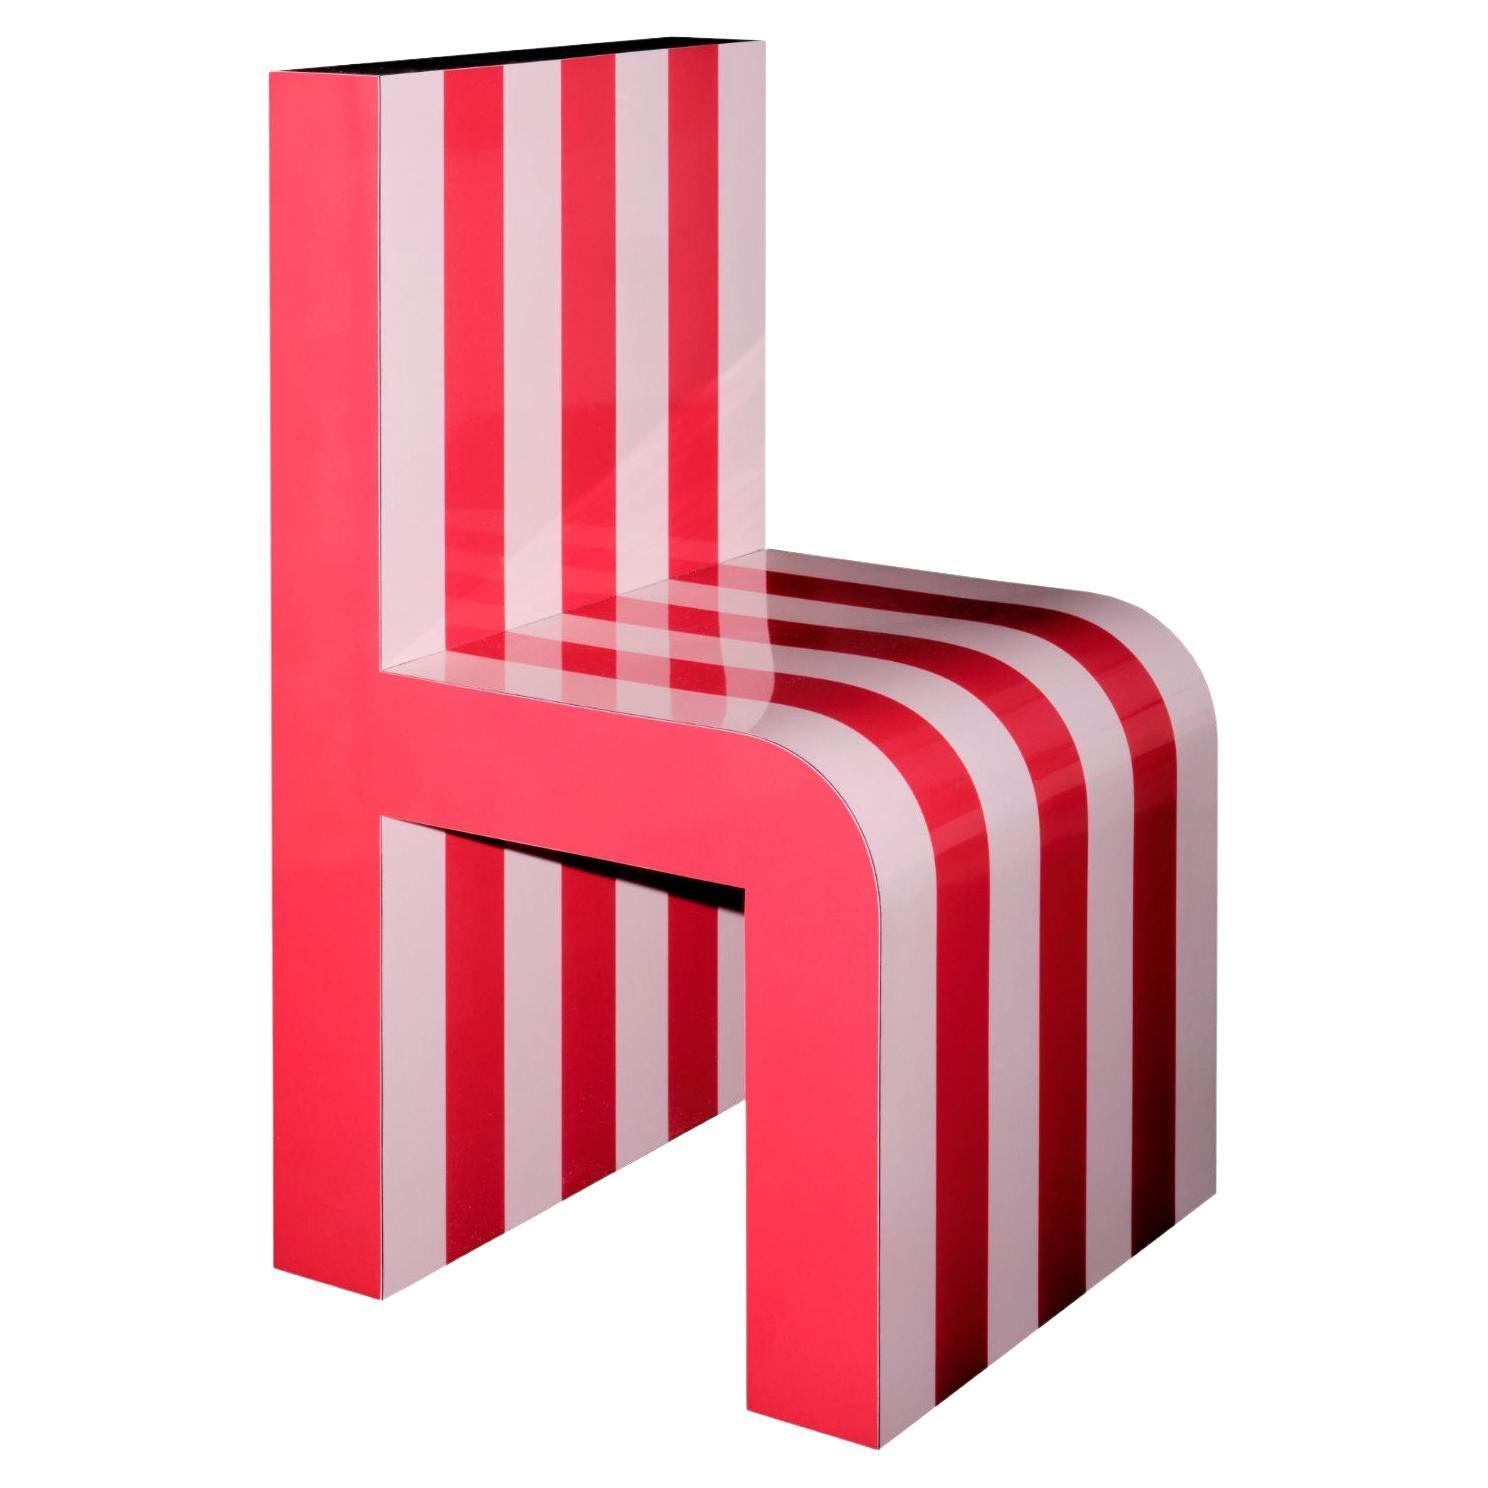 Arthur Arbesser Pemo Chair No. 2 - Red/Blush For Sale